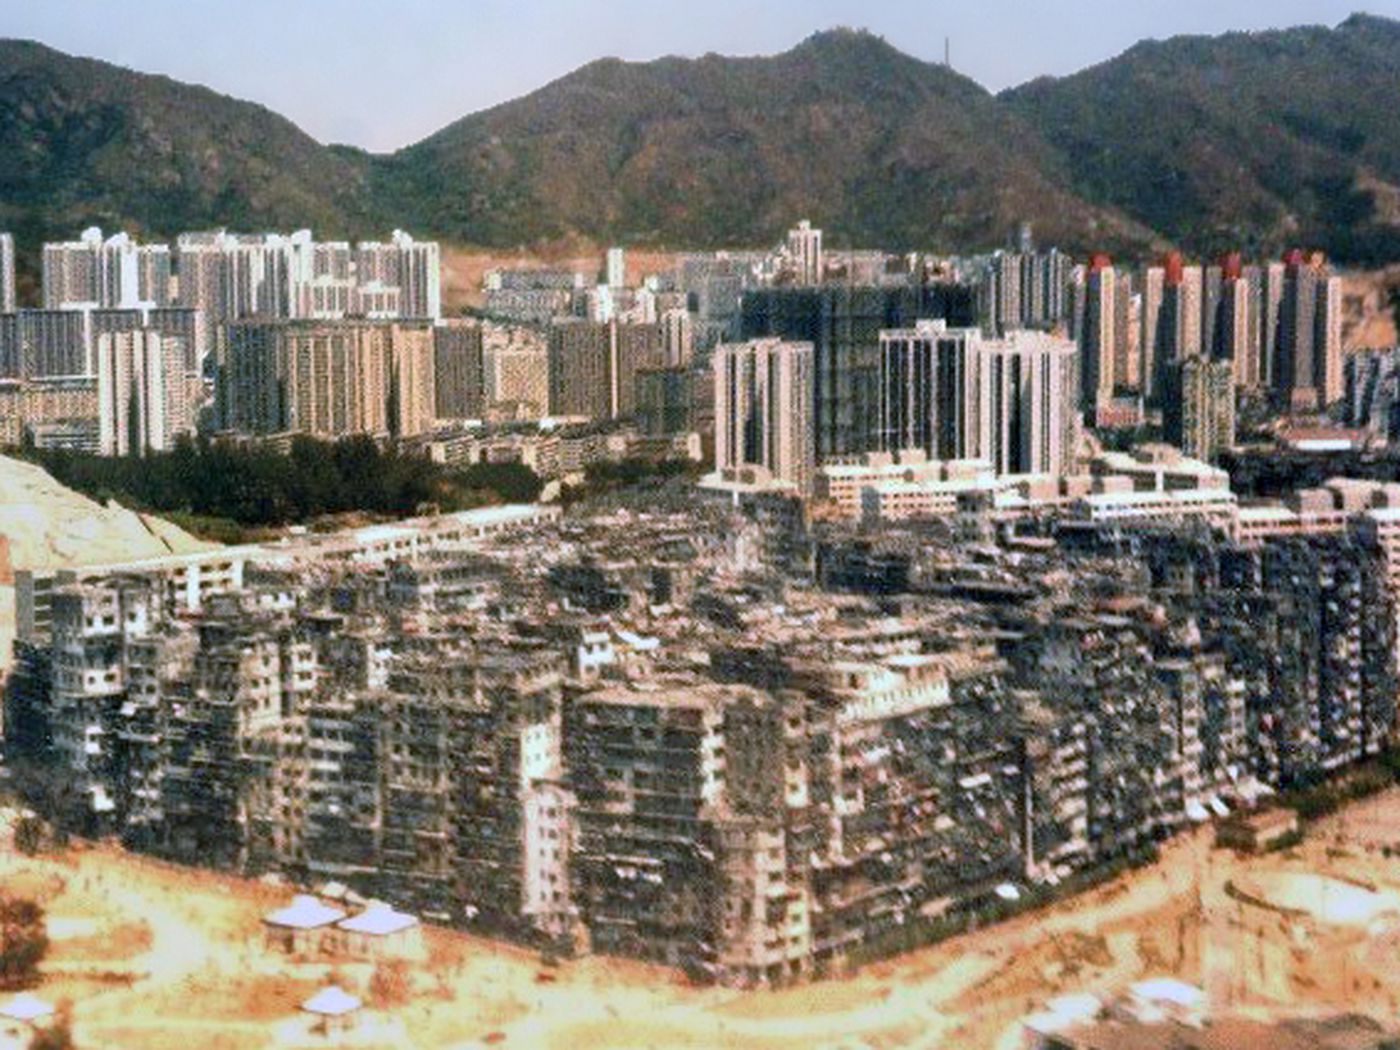 Life In Kowloon Walled City, The Self Sustaining City Of Darkness